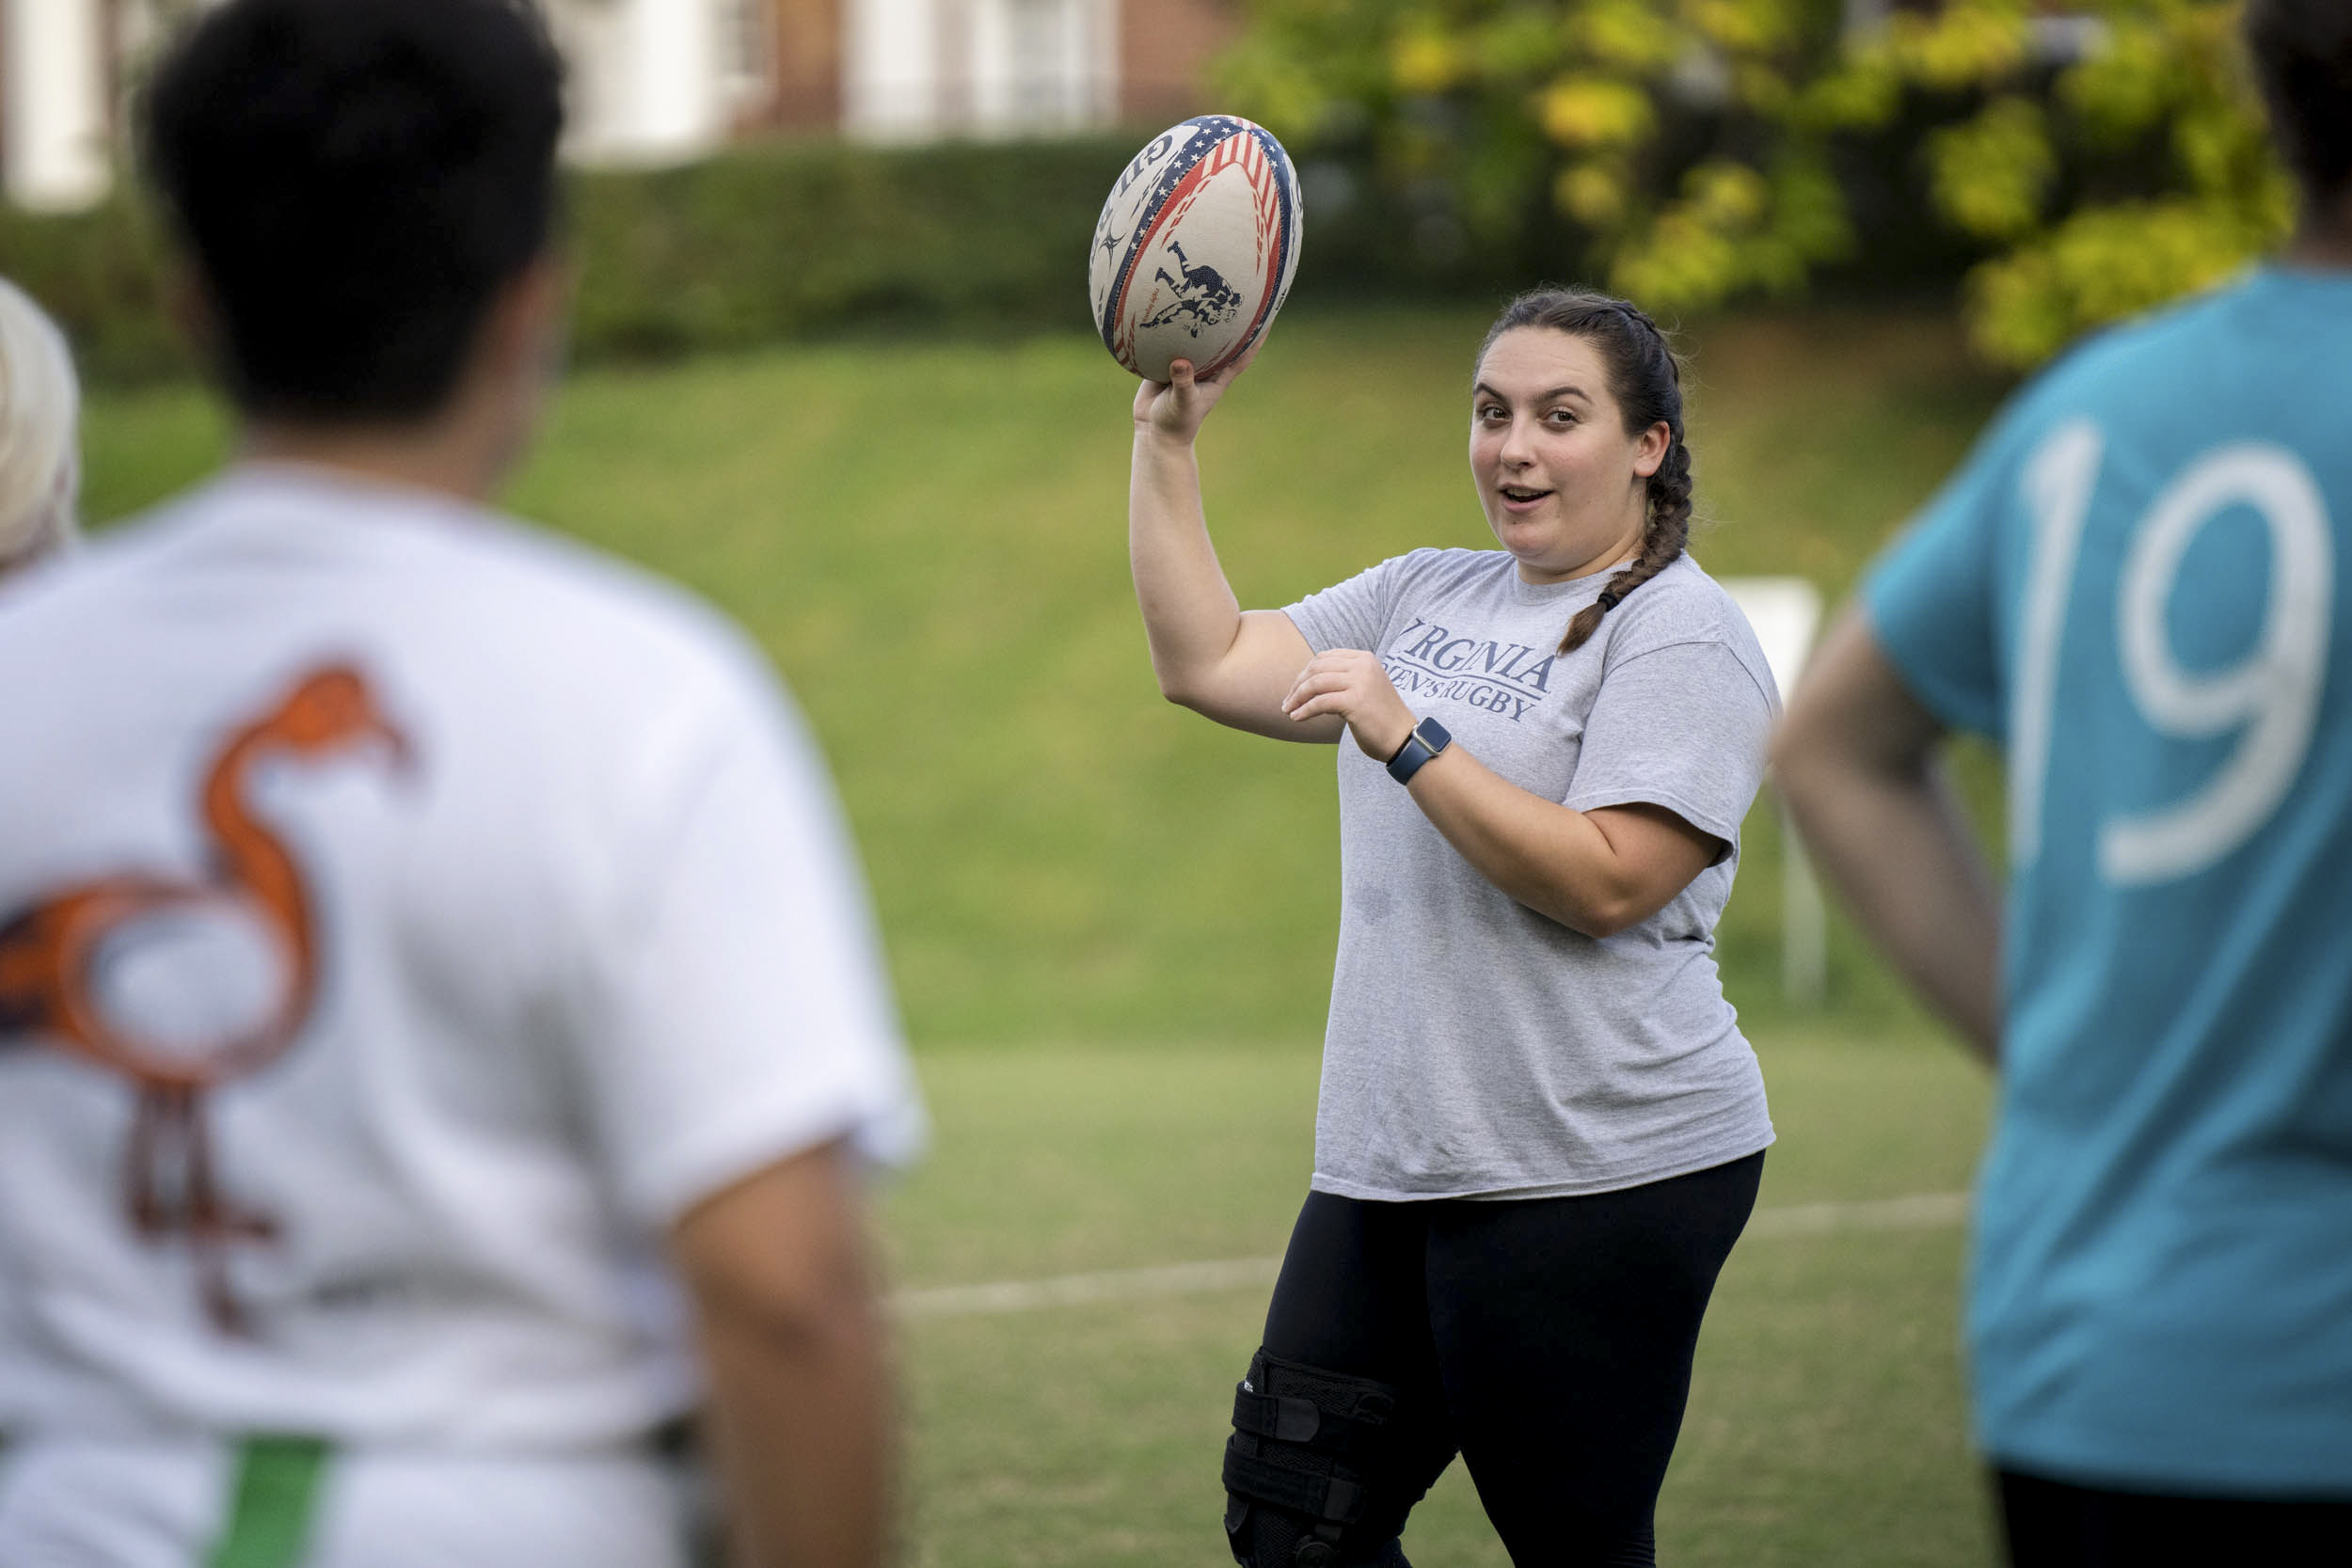 Alexis Ward talking to other Rugby players while holding a rugby ball in the air